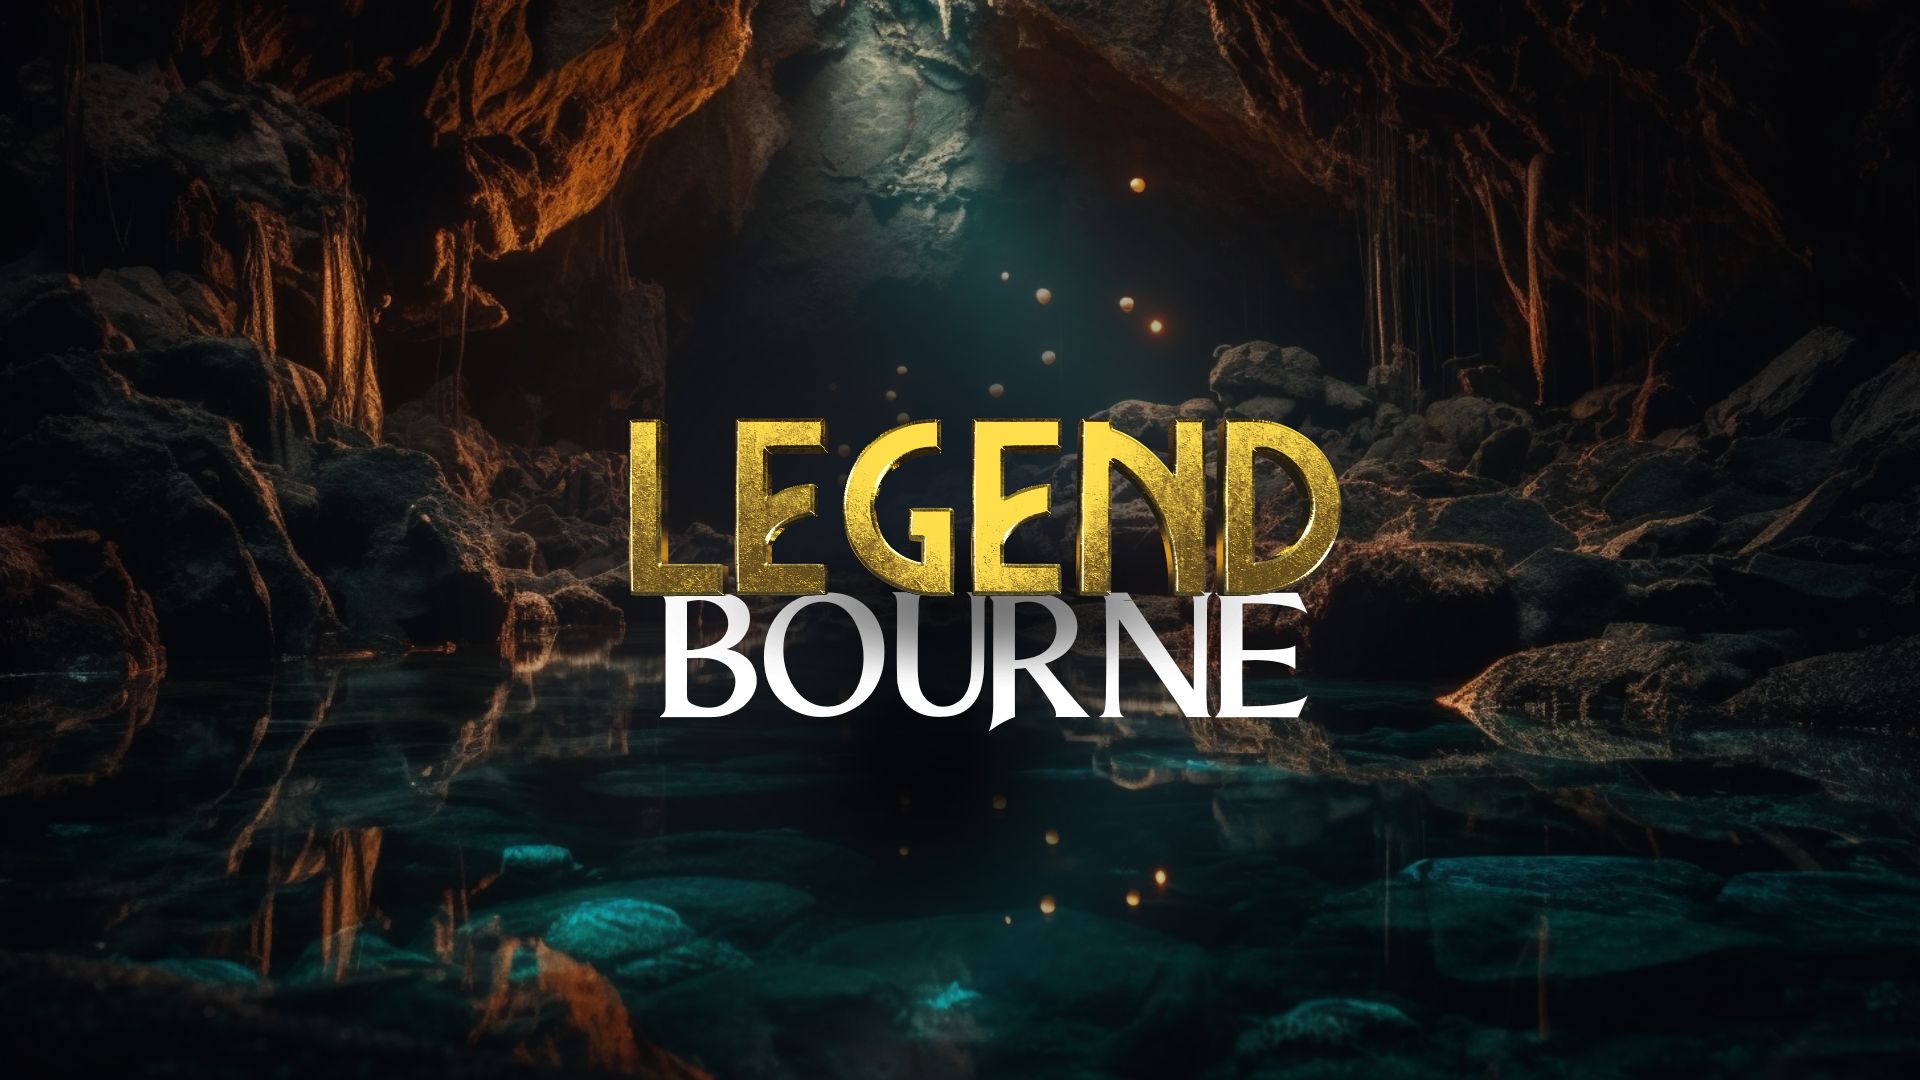 The Legendbourne: Discover your inner writing legend with LegendFiction’s community and resources